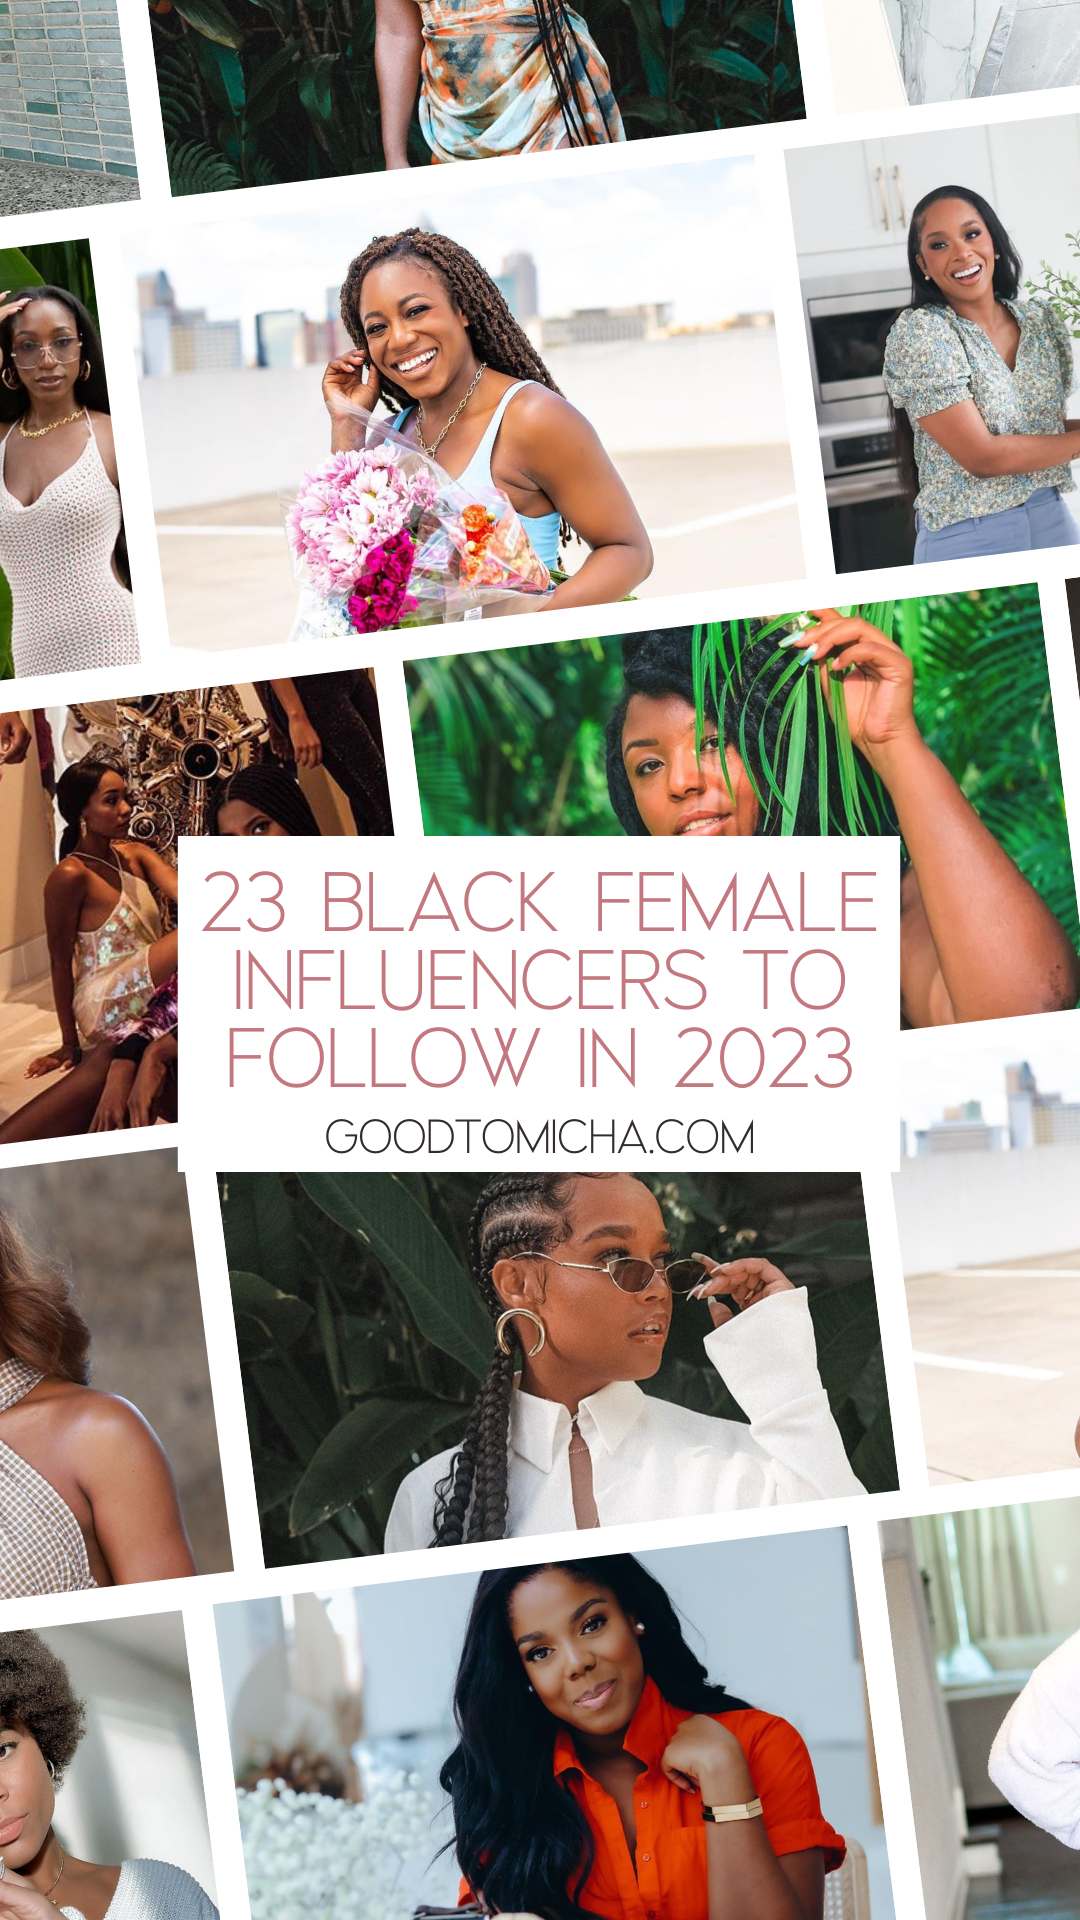 23 Black Female Influencers to Follow in 2023